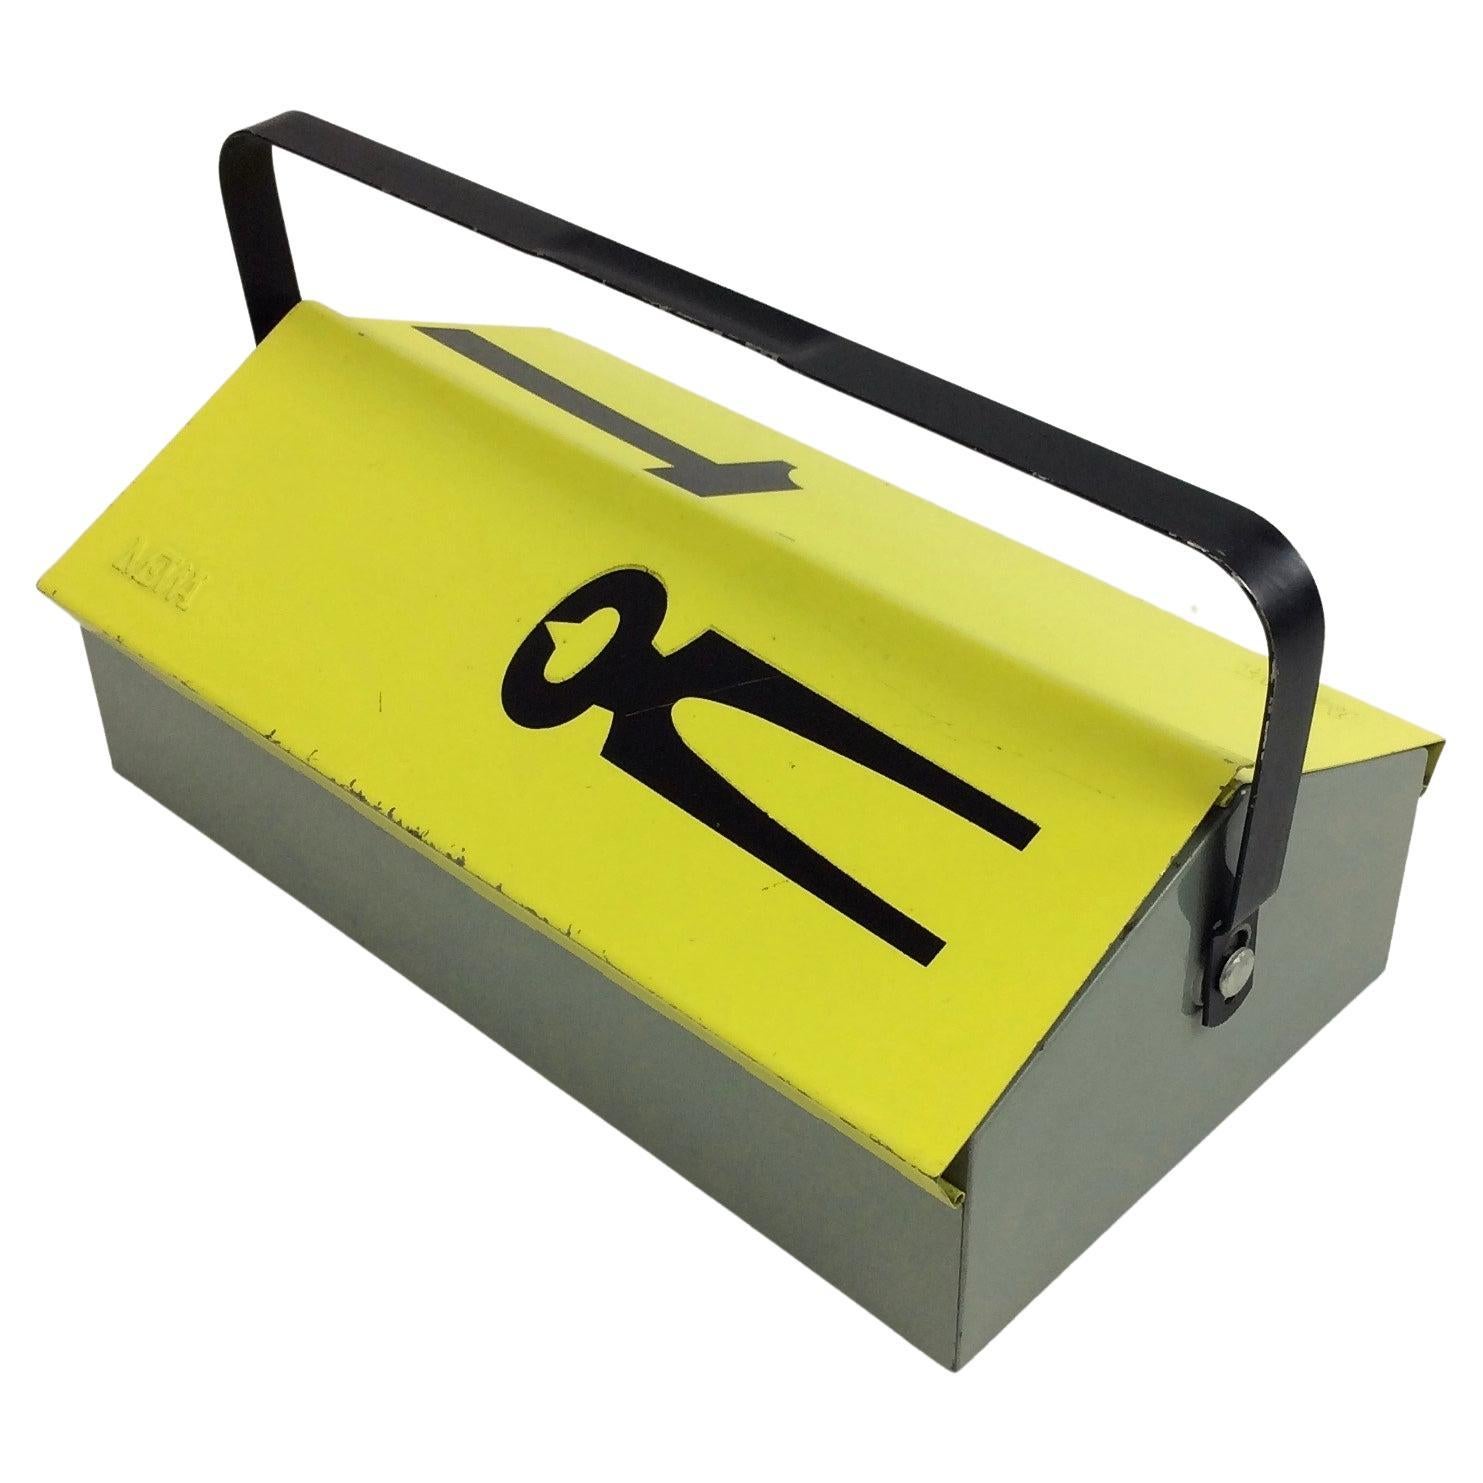 Nice Wilhelm Kienzle tool box for MEWA, circa 1950, Switzertland.
Yellow and grey lacquered metal. Black handle, black hammer and pliers patterns.
Original good condition.
Dimensions: 39 cm W, 14 cm H, 22 cm H with the handle pulled, 23 cm